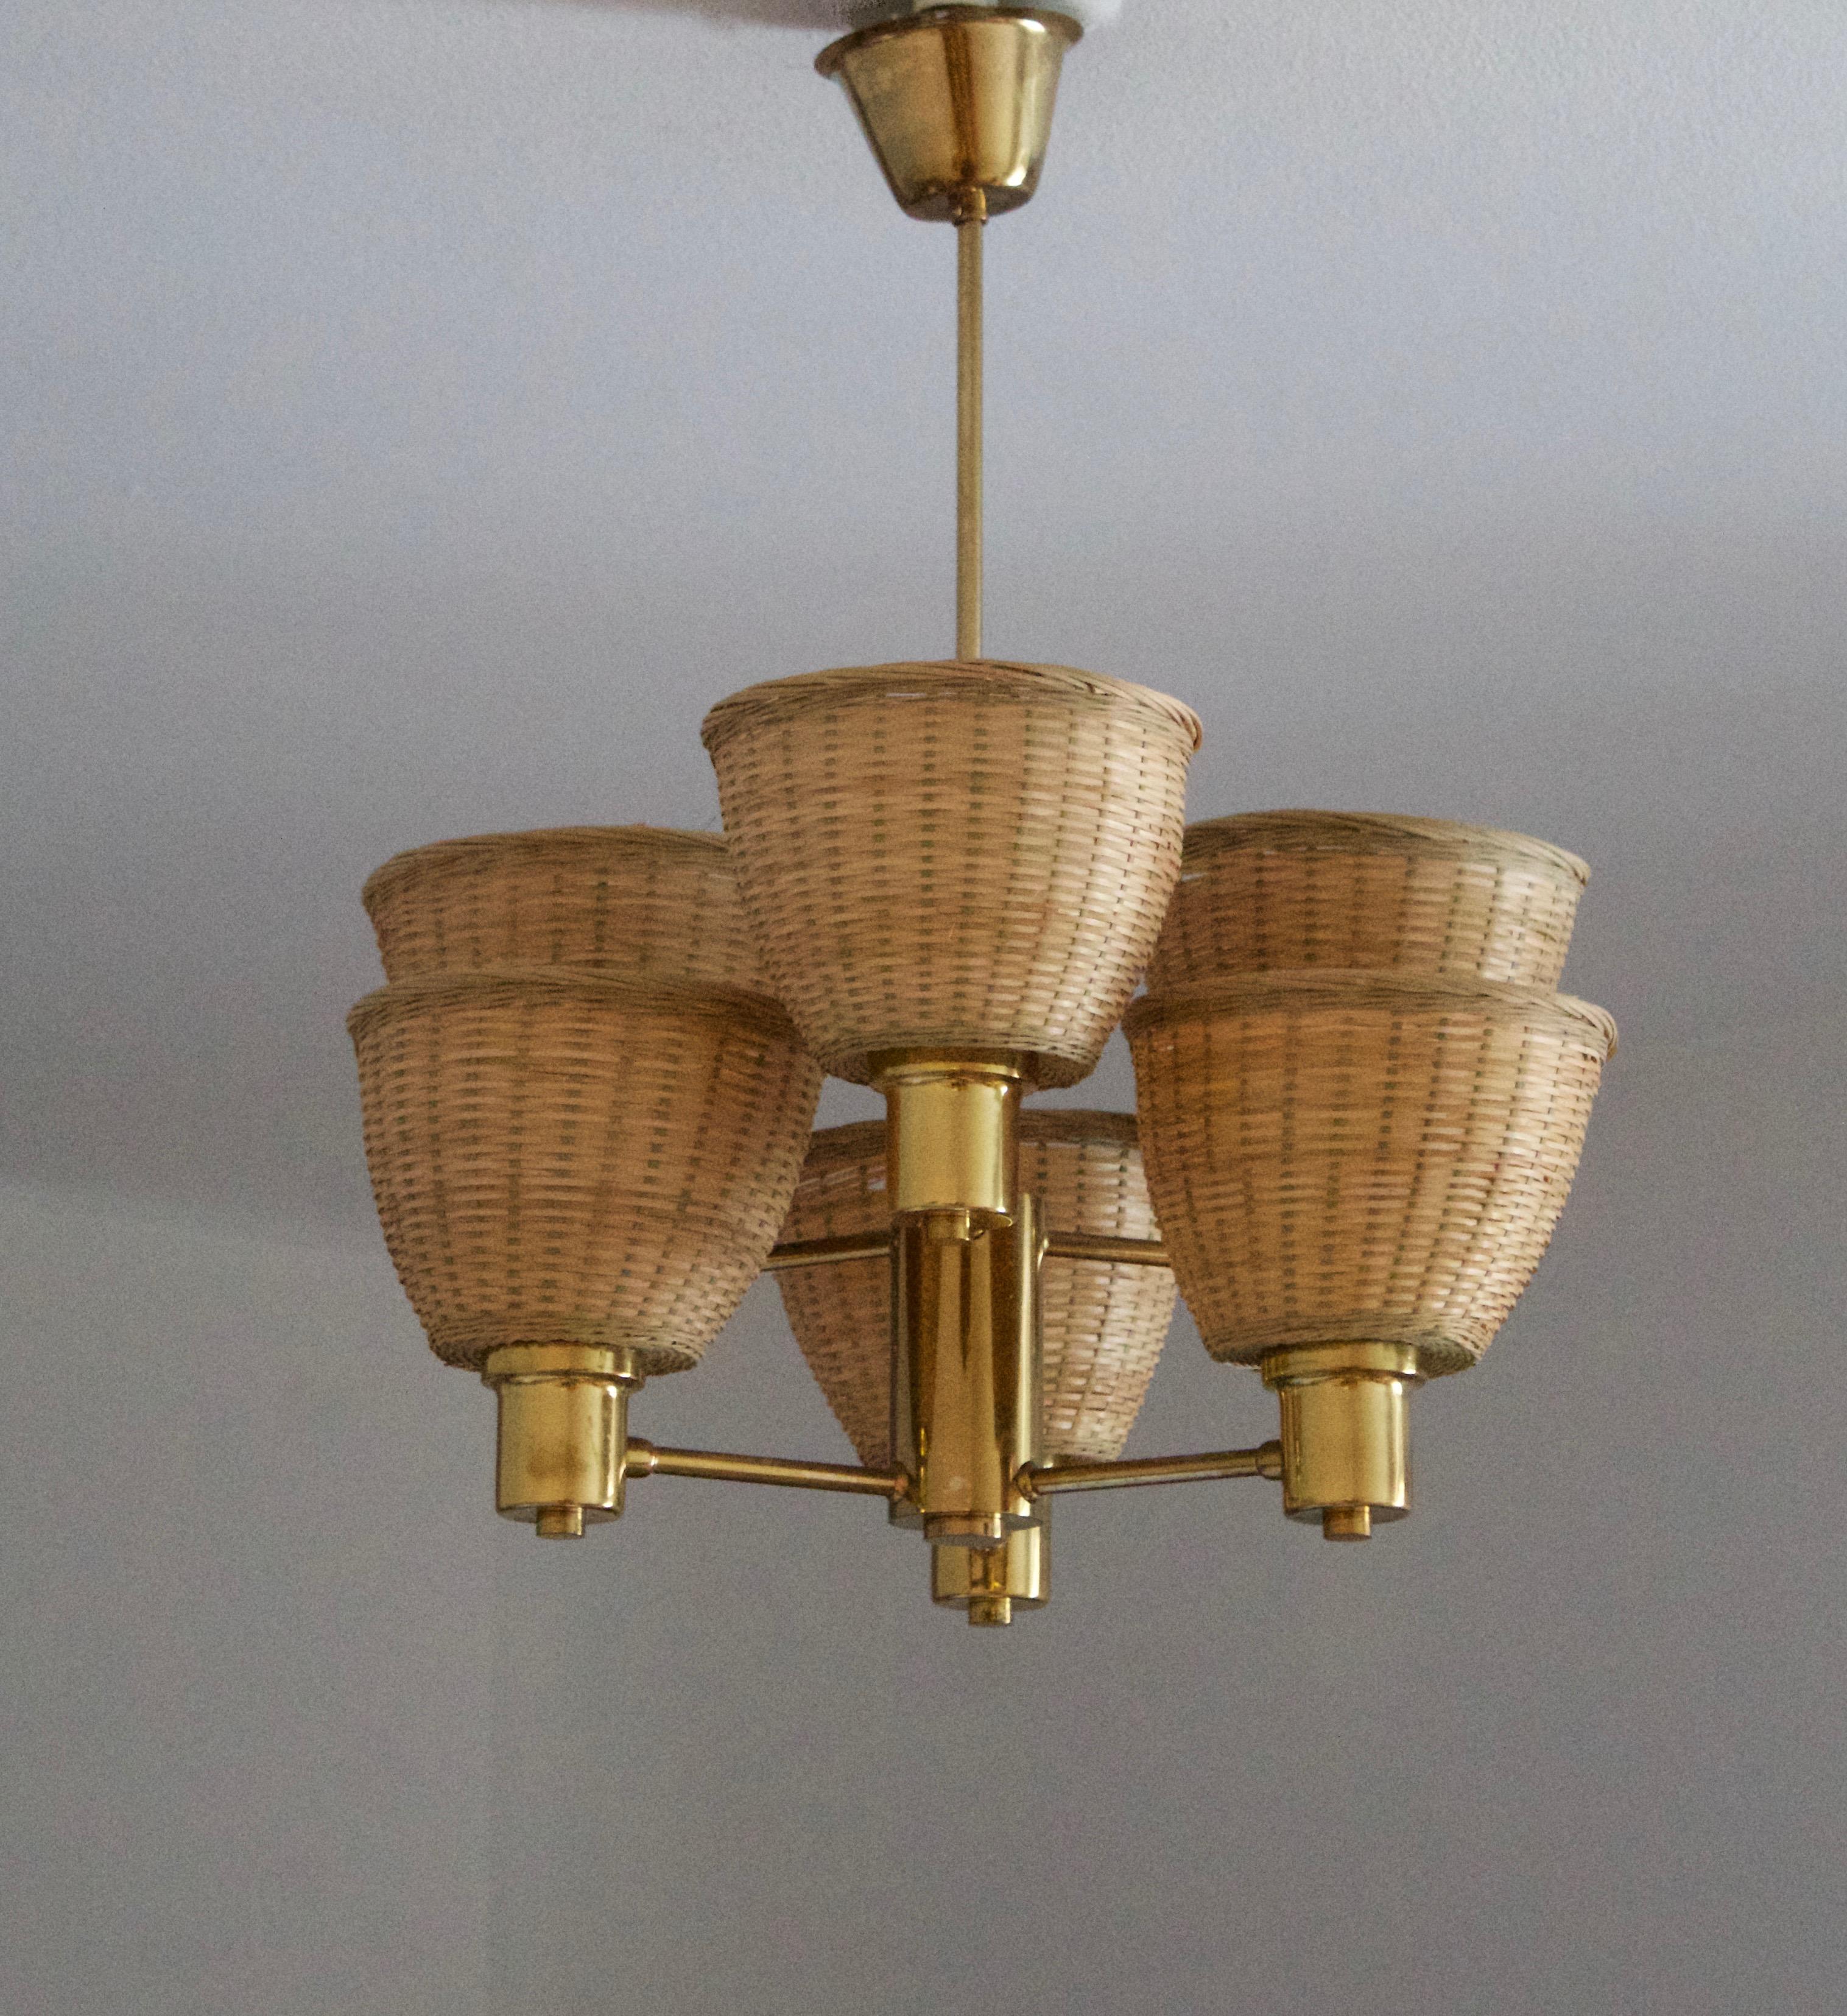 A chandelier, design attributed to Hans-Agne Jakobsson. Presumably by his own firm in Markaryd, Sweden. c. 1960s. Unmarked.

Assorted vintage rattan lampshades.